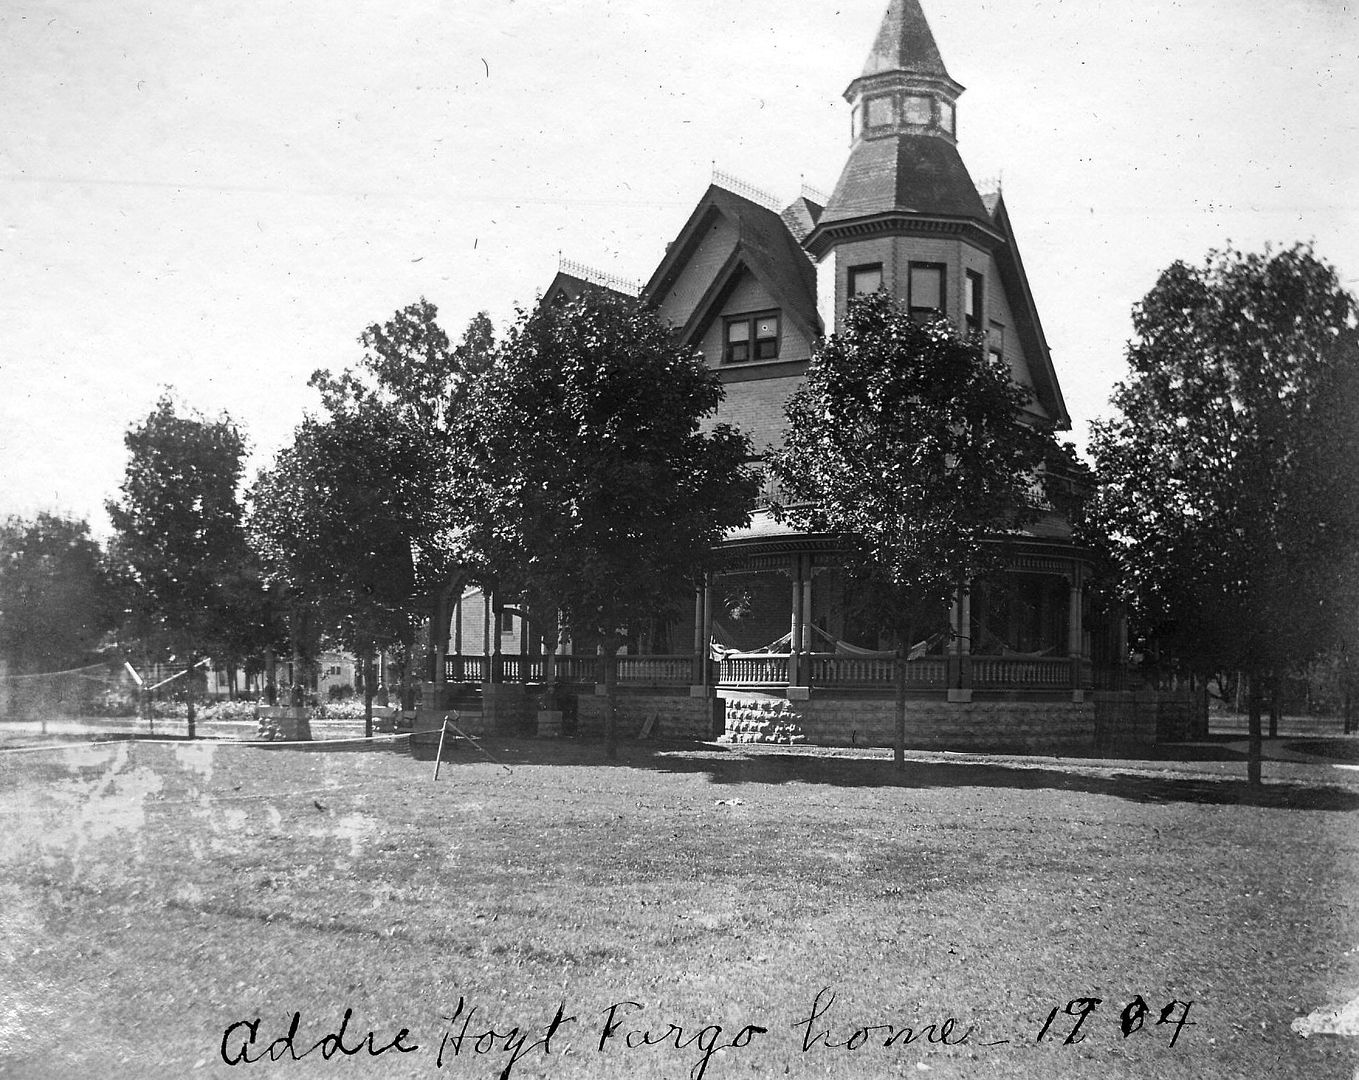 Addie and Enoch lived in his pad, The Fargo Mansion.